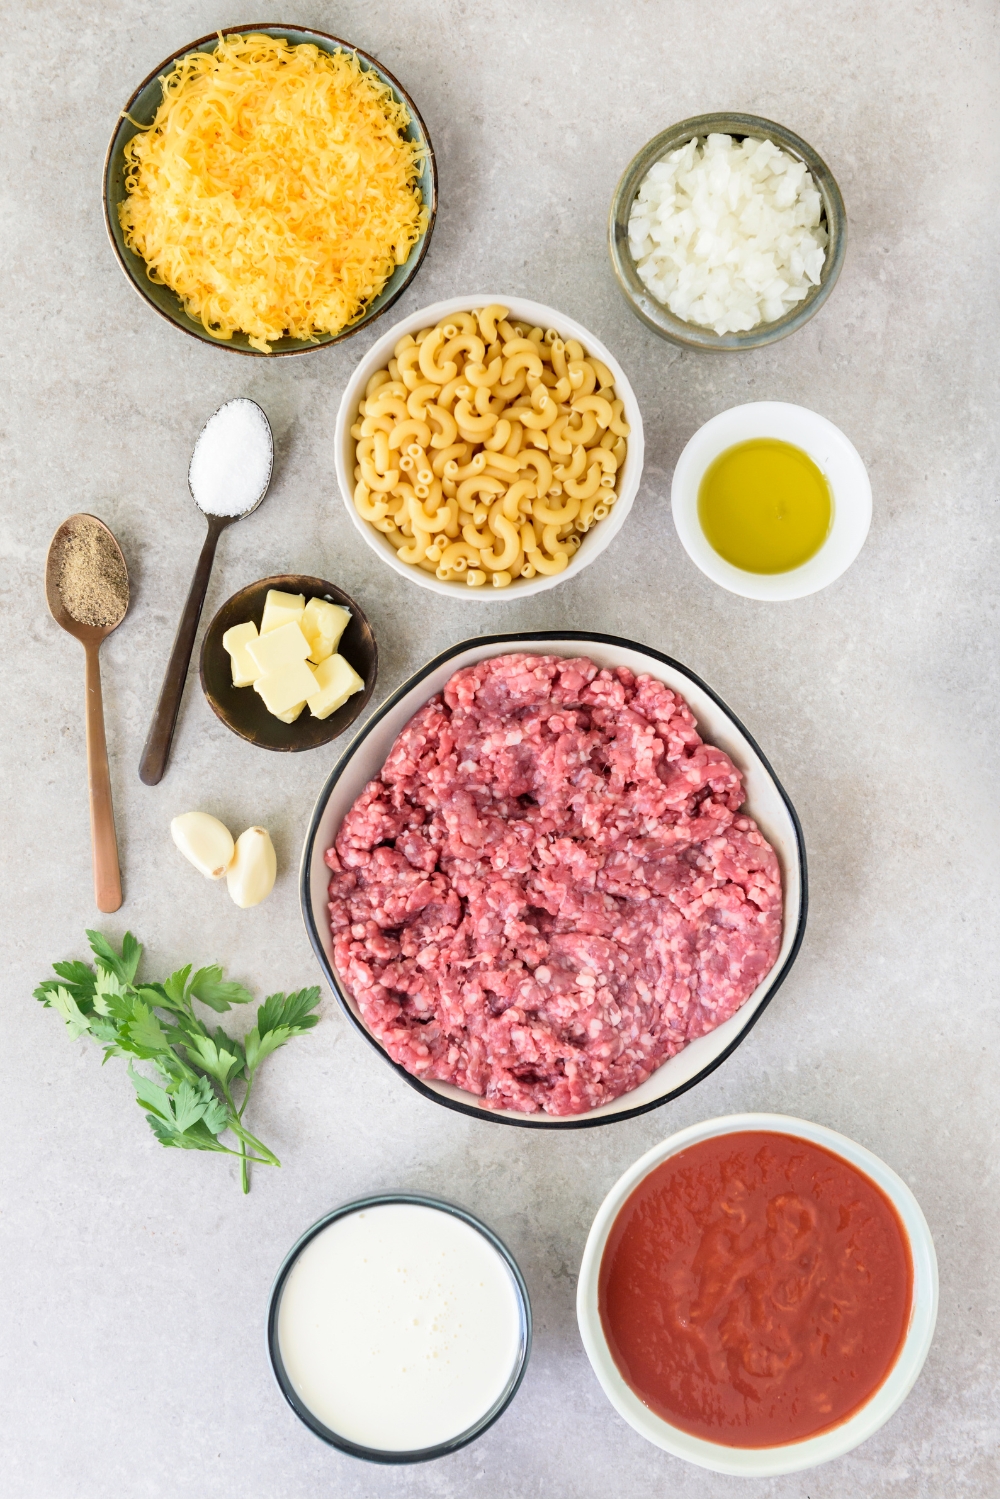 An assortment of ingredients including bowls of raw ground beef, tomato sauce, shredded cheese, dried macaroni, butter, and cream.